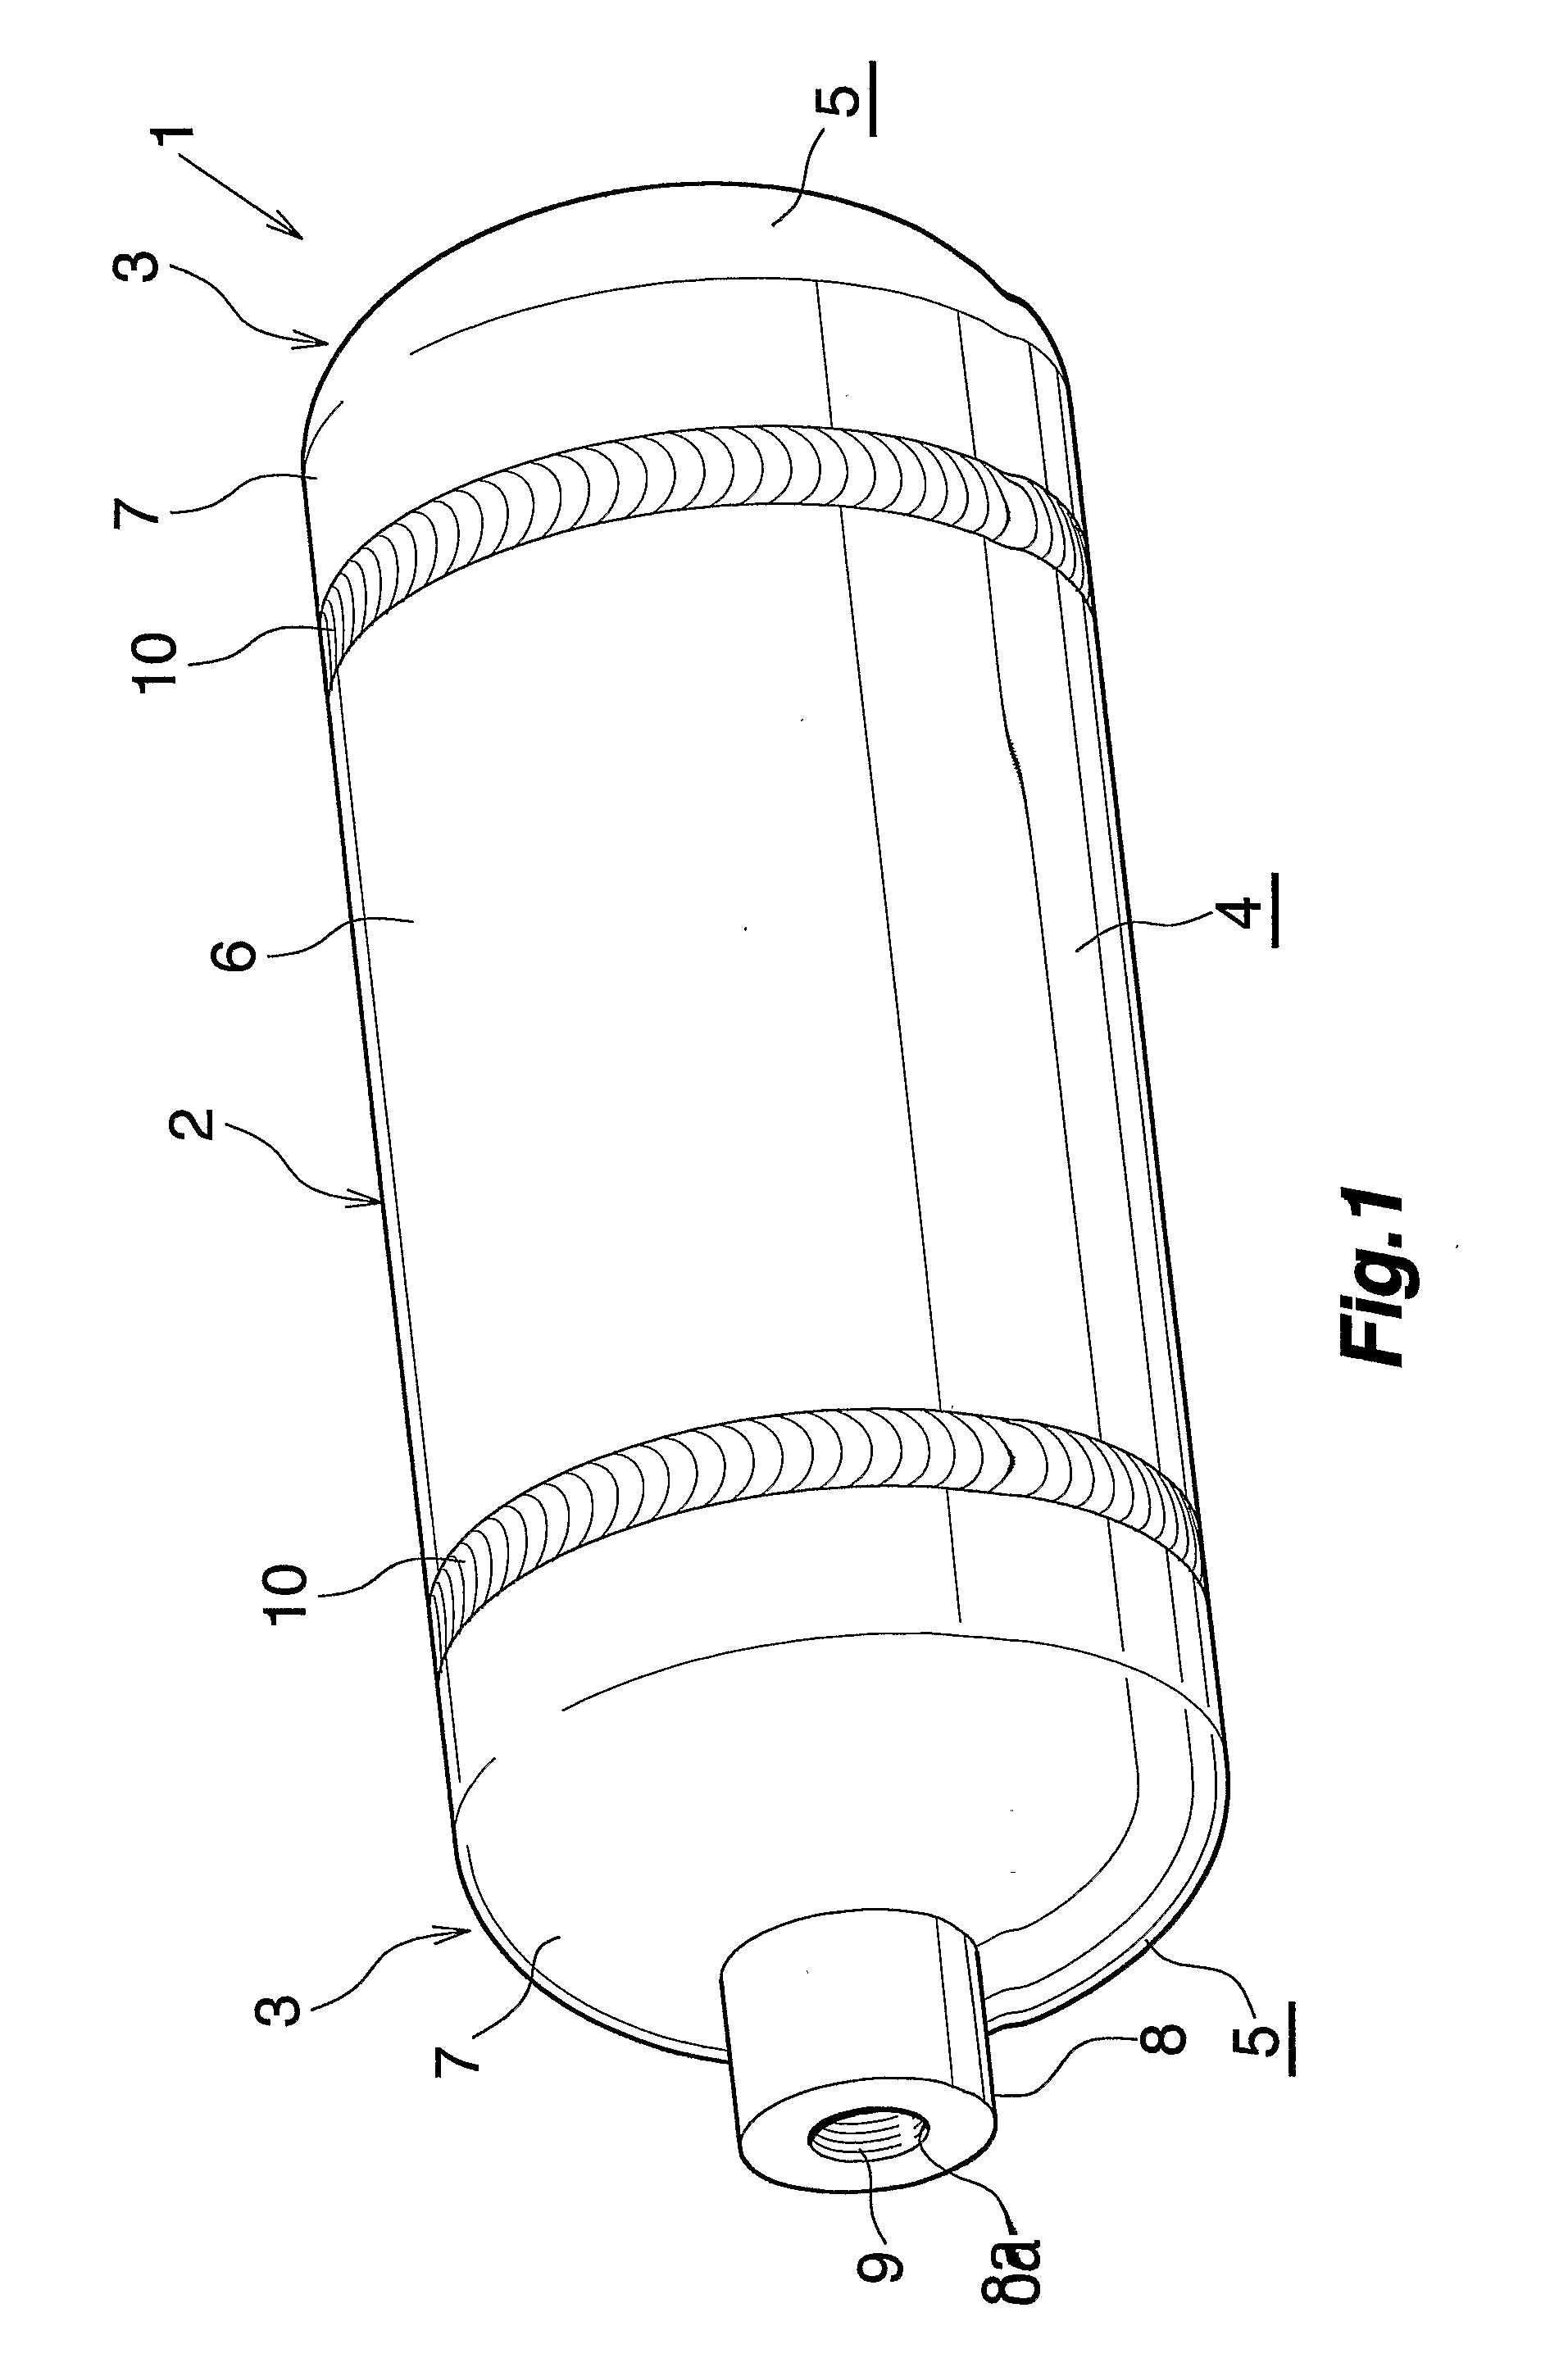 Process for Fabricating Pressure Vessel Liner